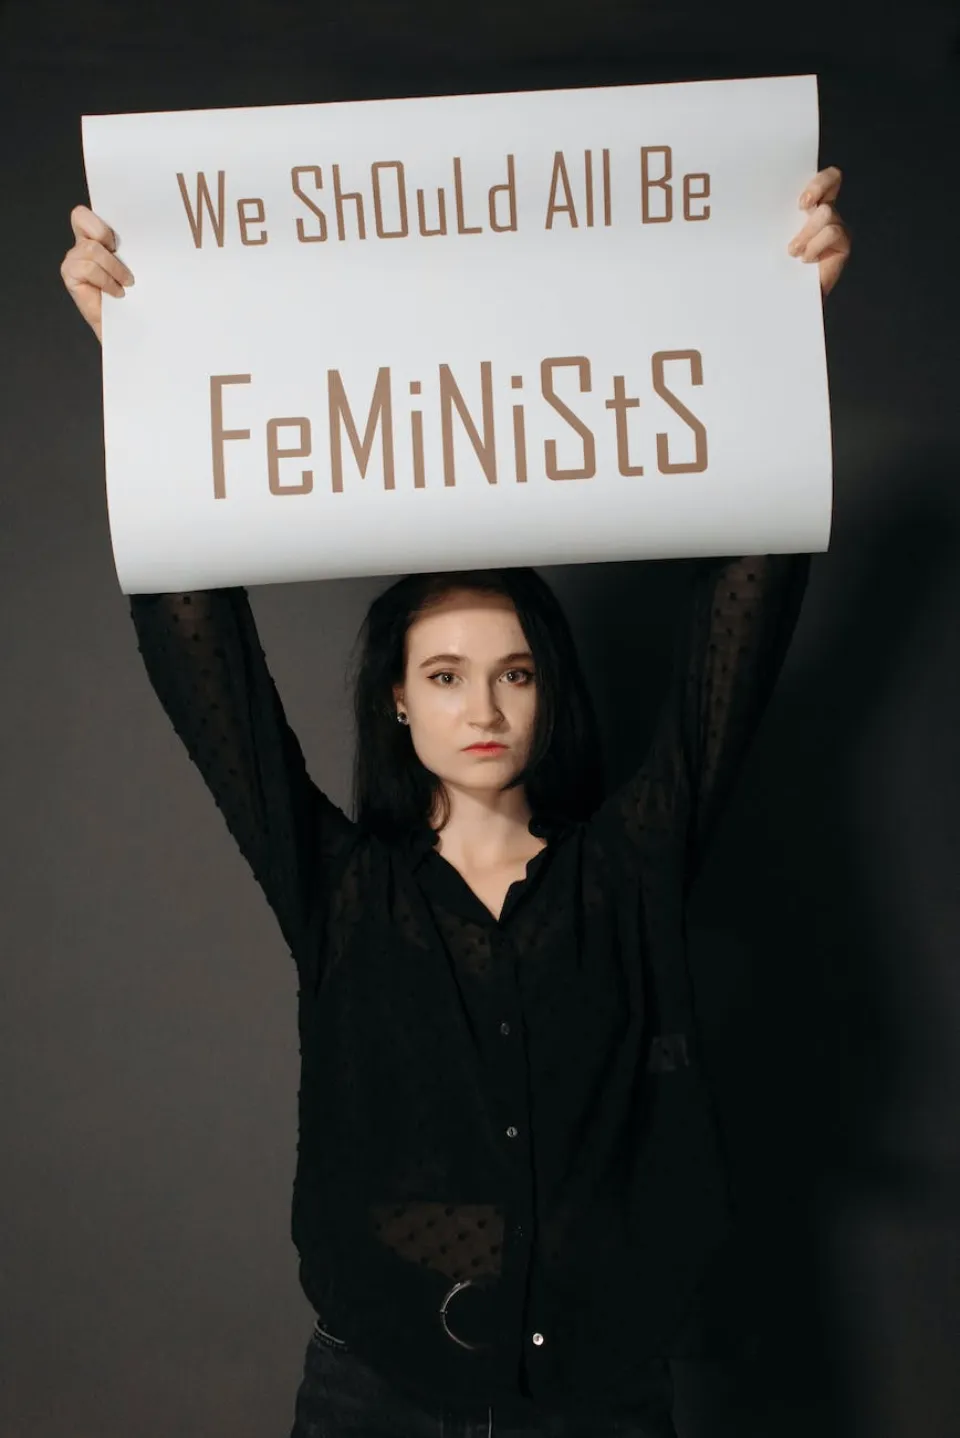 “We Should All Be Feminists” - Best Niche Products